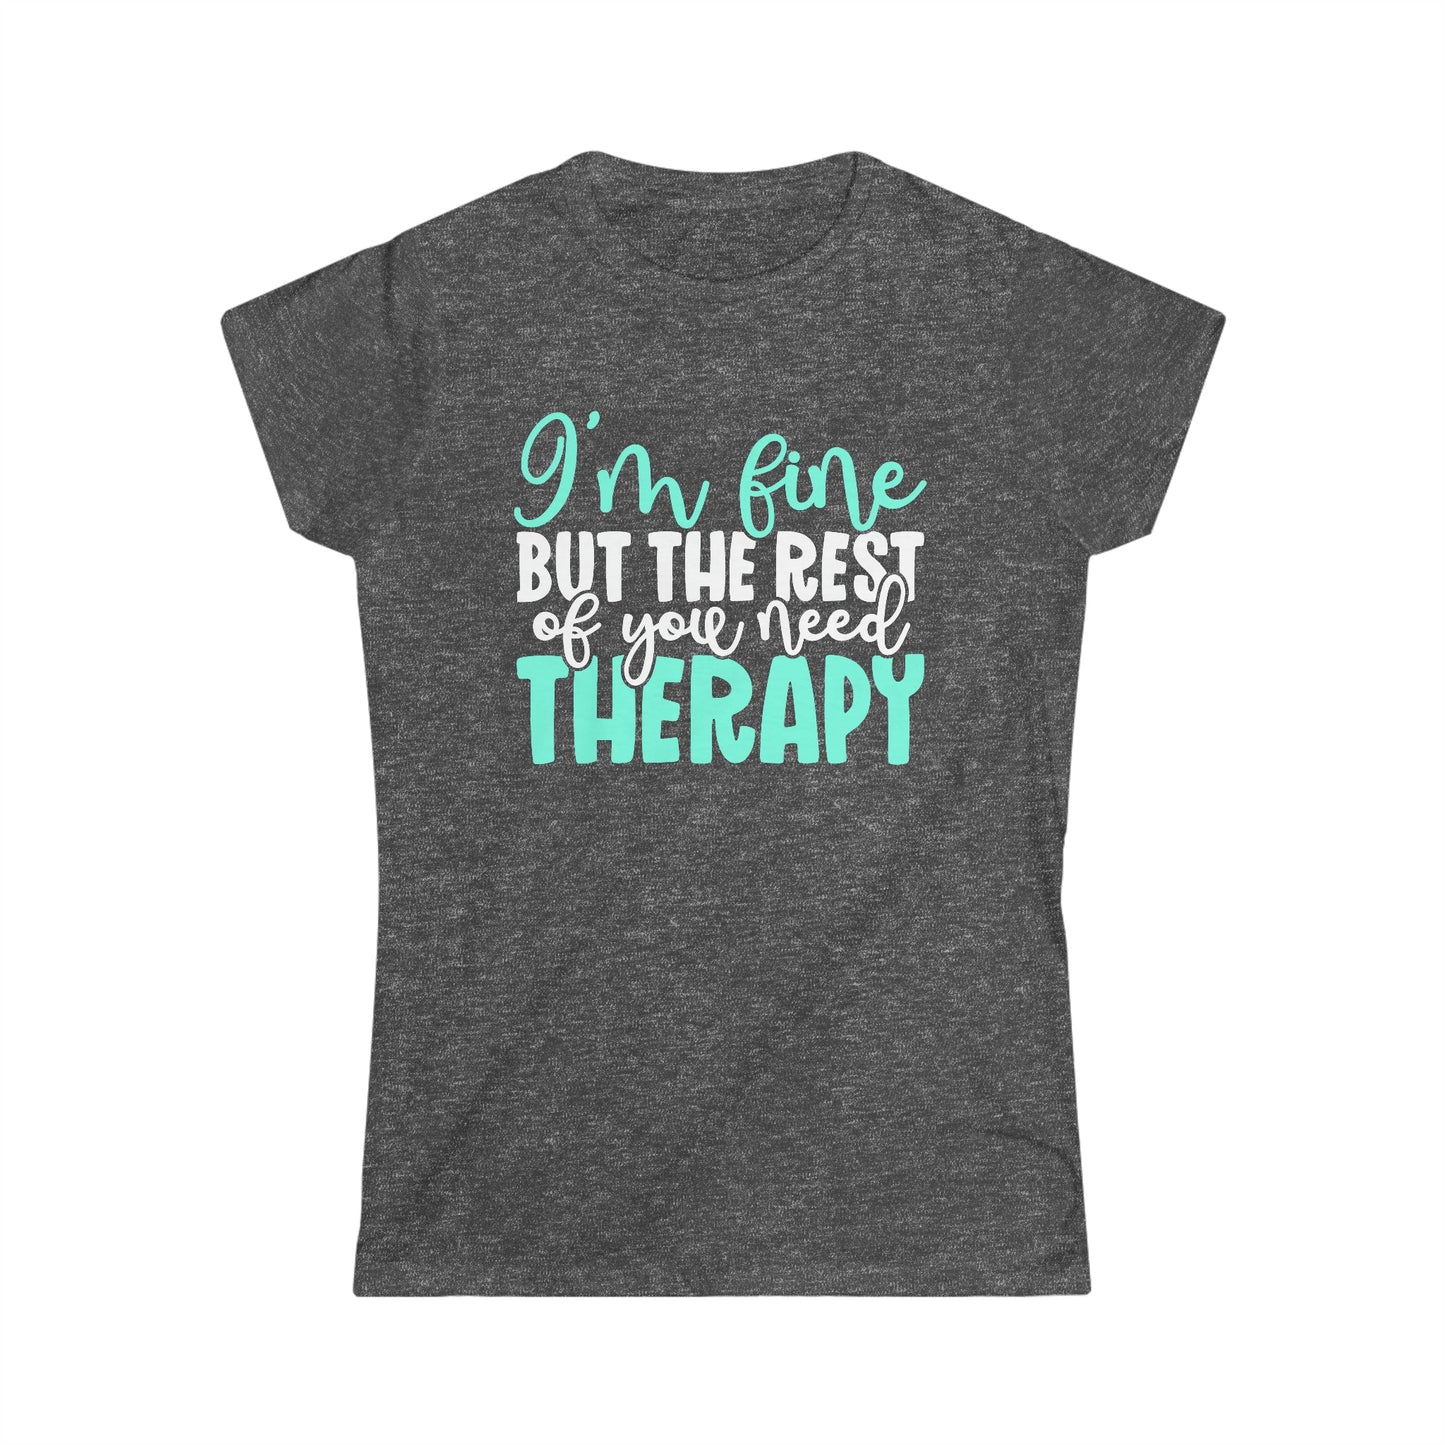 CrazyYetiClothing, CYC, Y'all Need Therapy (Women's Softstyle Tee), T-Shirt